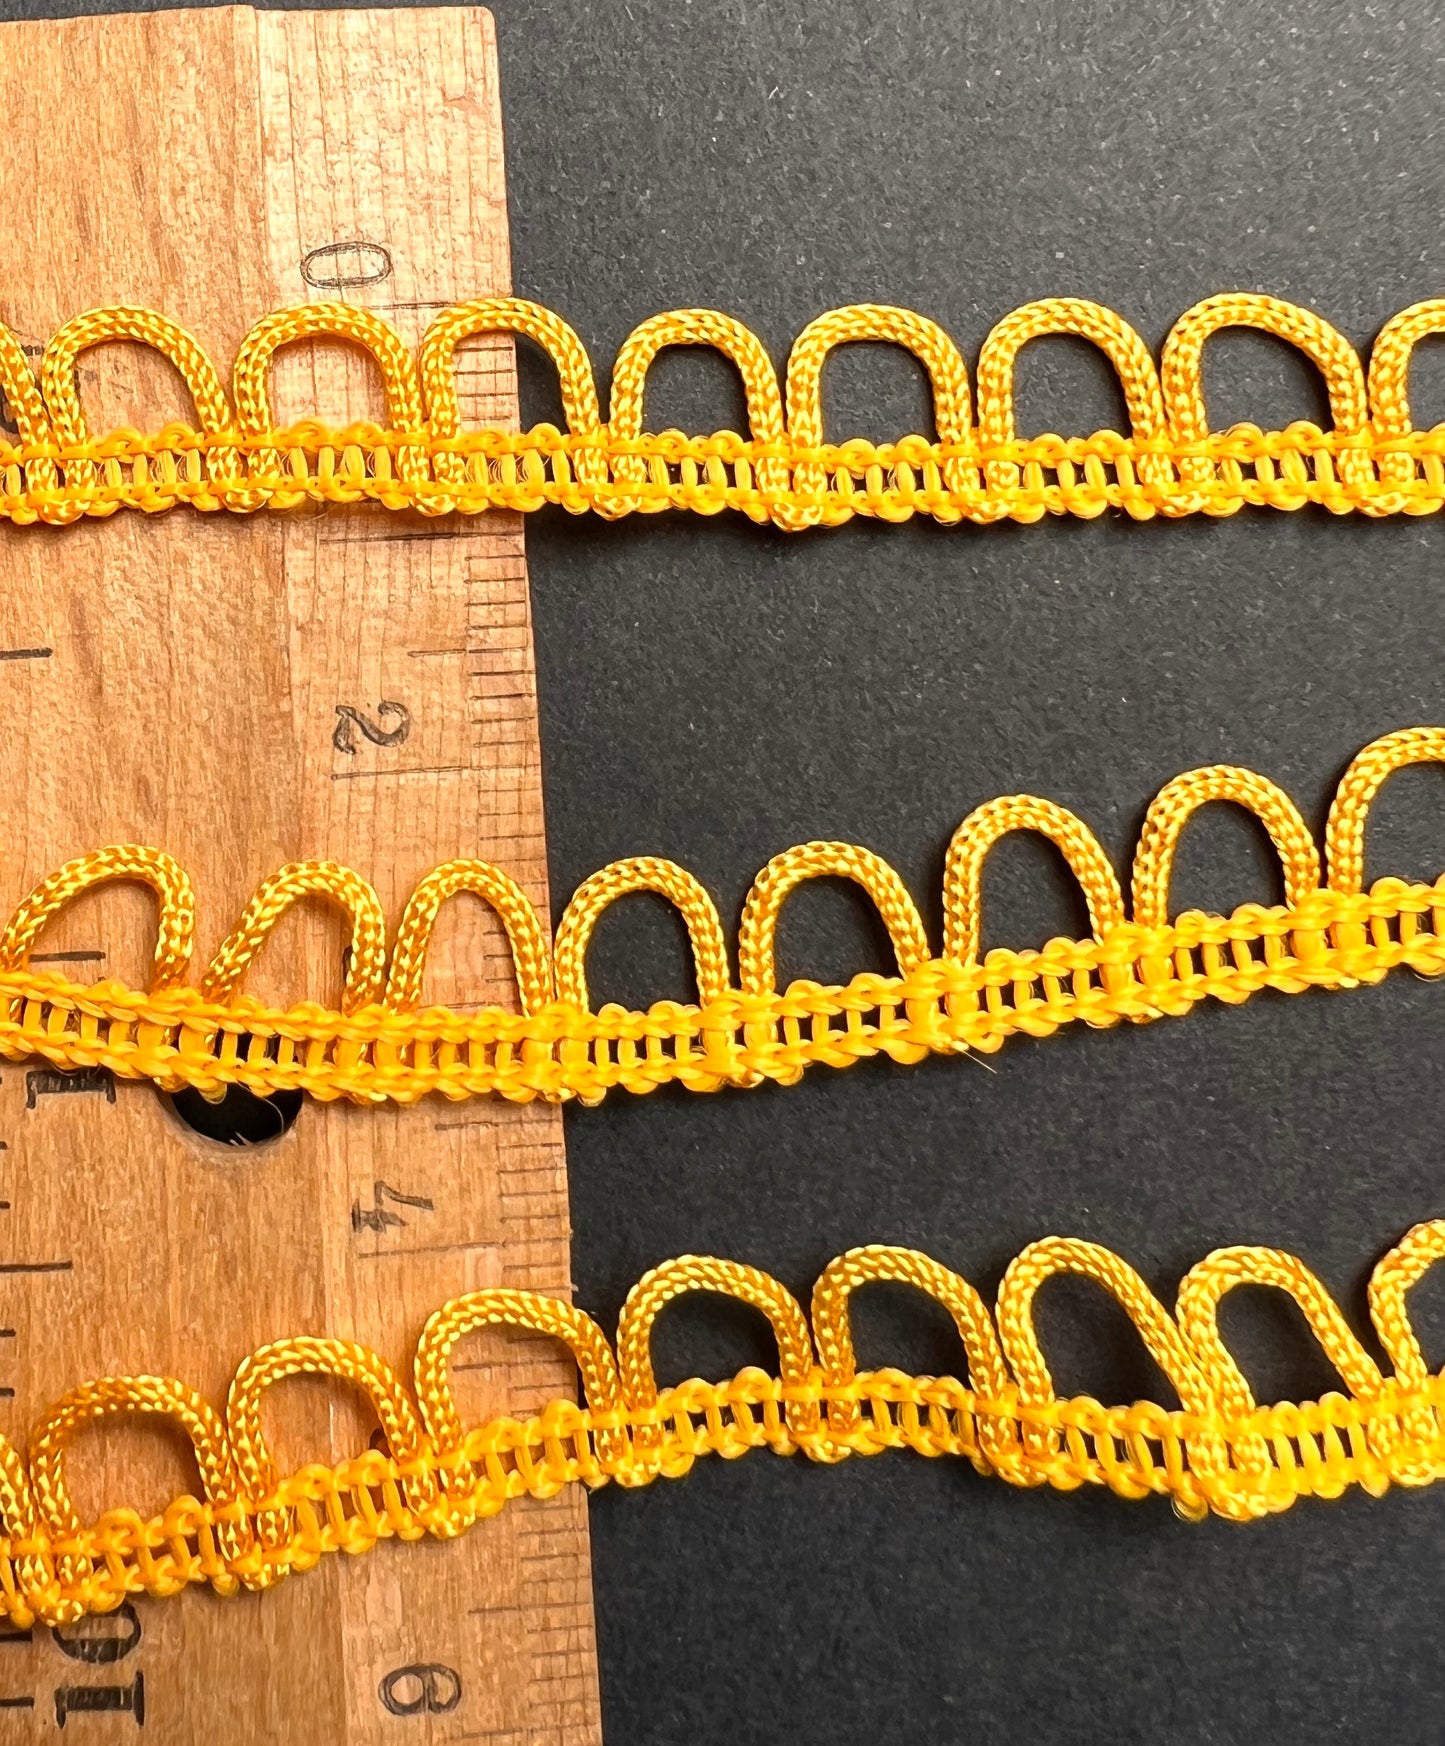 36 yds Cheerful Looped Gold Yellow Vintage Trim -1cm wide - Made in England